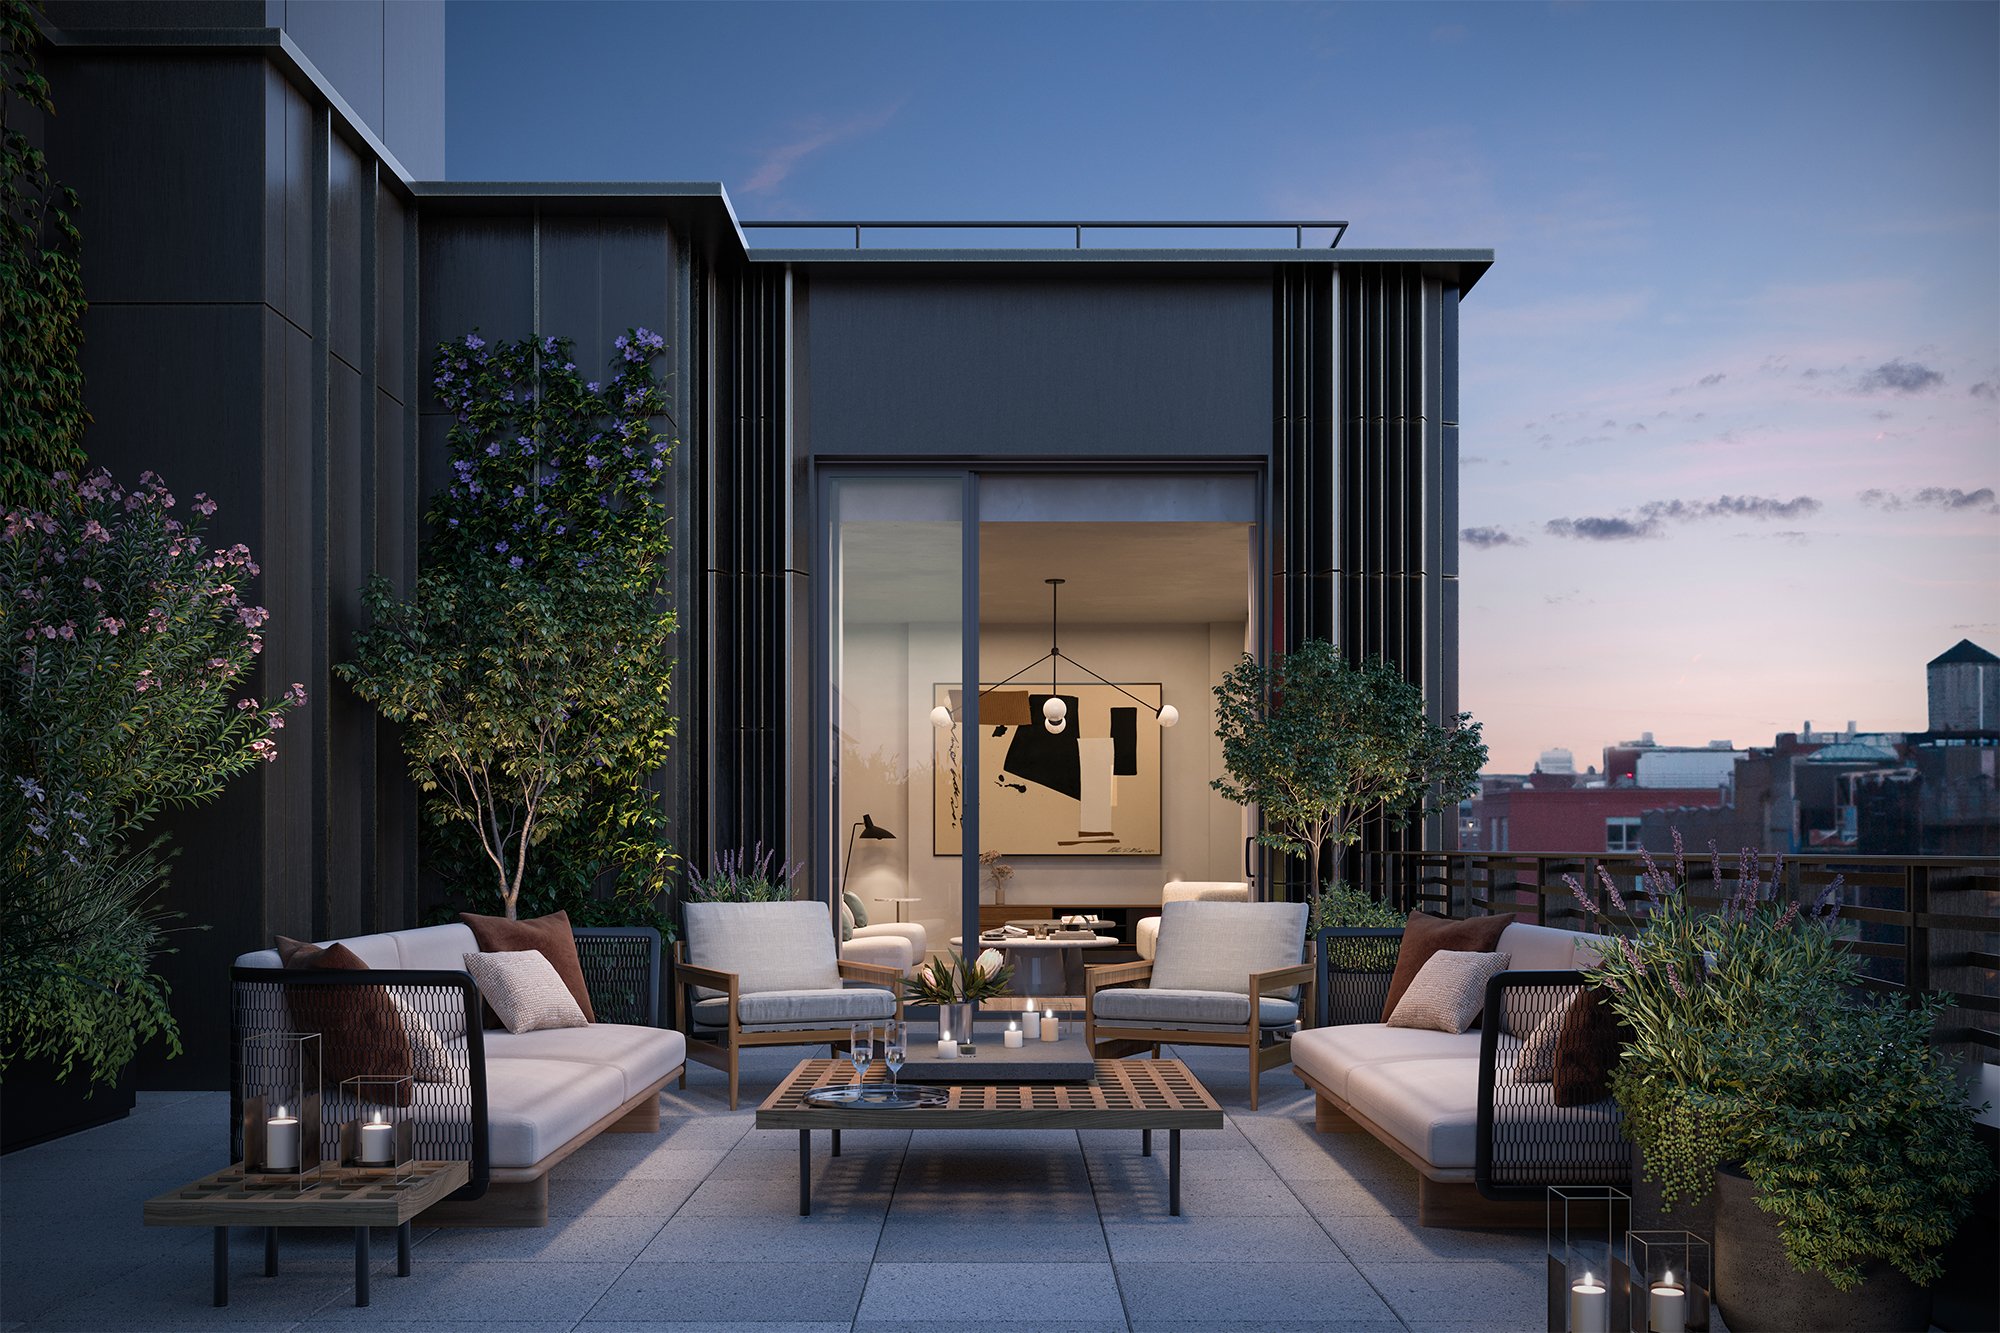  Offering one to four-bedroom, light-filled homes, The Keller's premier location on the West Village waterfront provides residents with easy access to Hudson River Park. The condos feature European white oak flooring, quarter-cut walnut-clad entry do